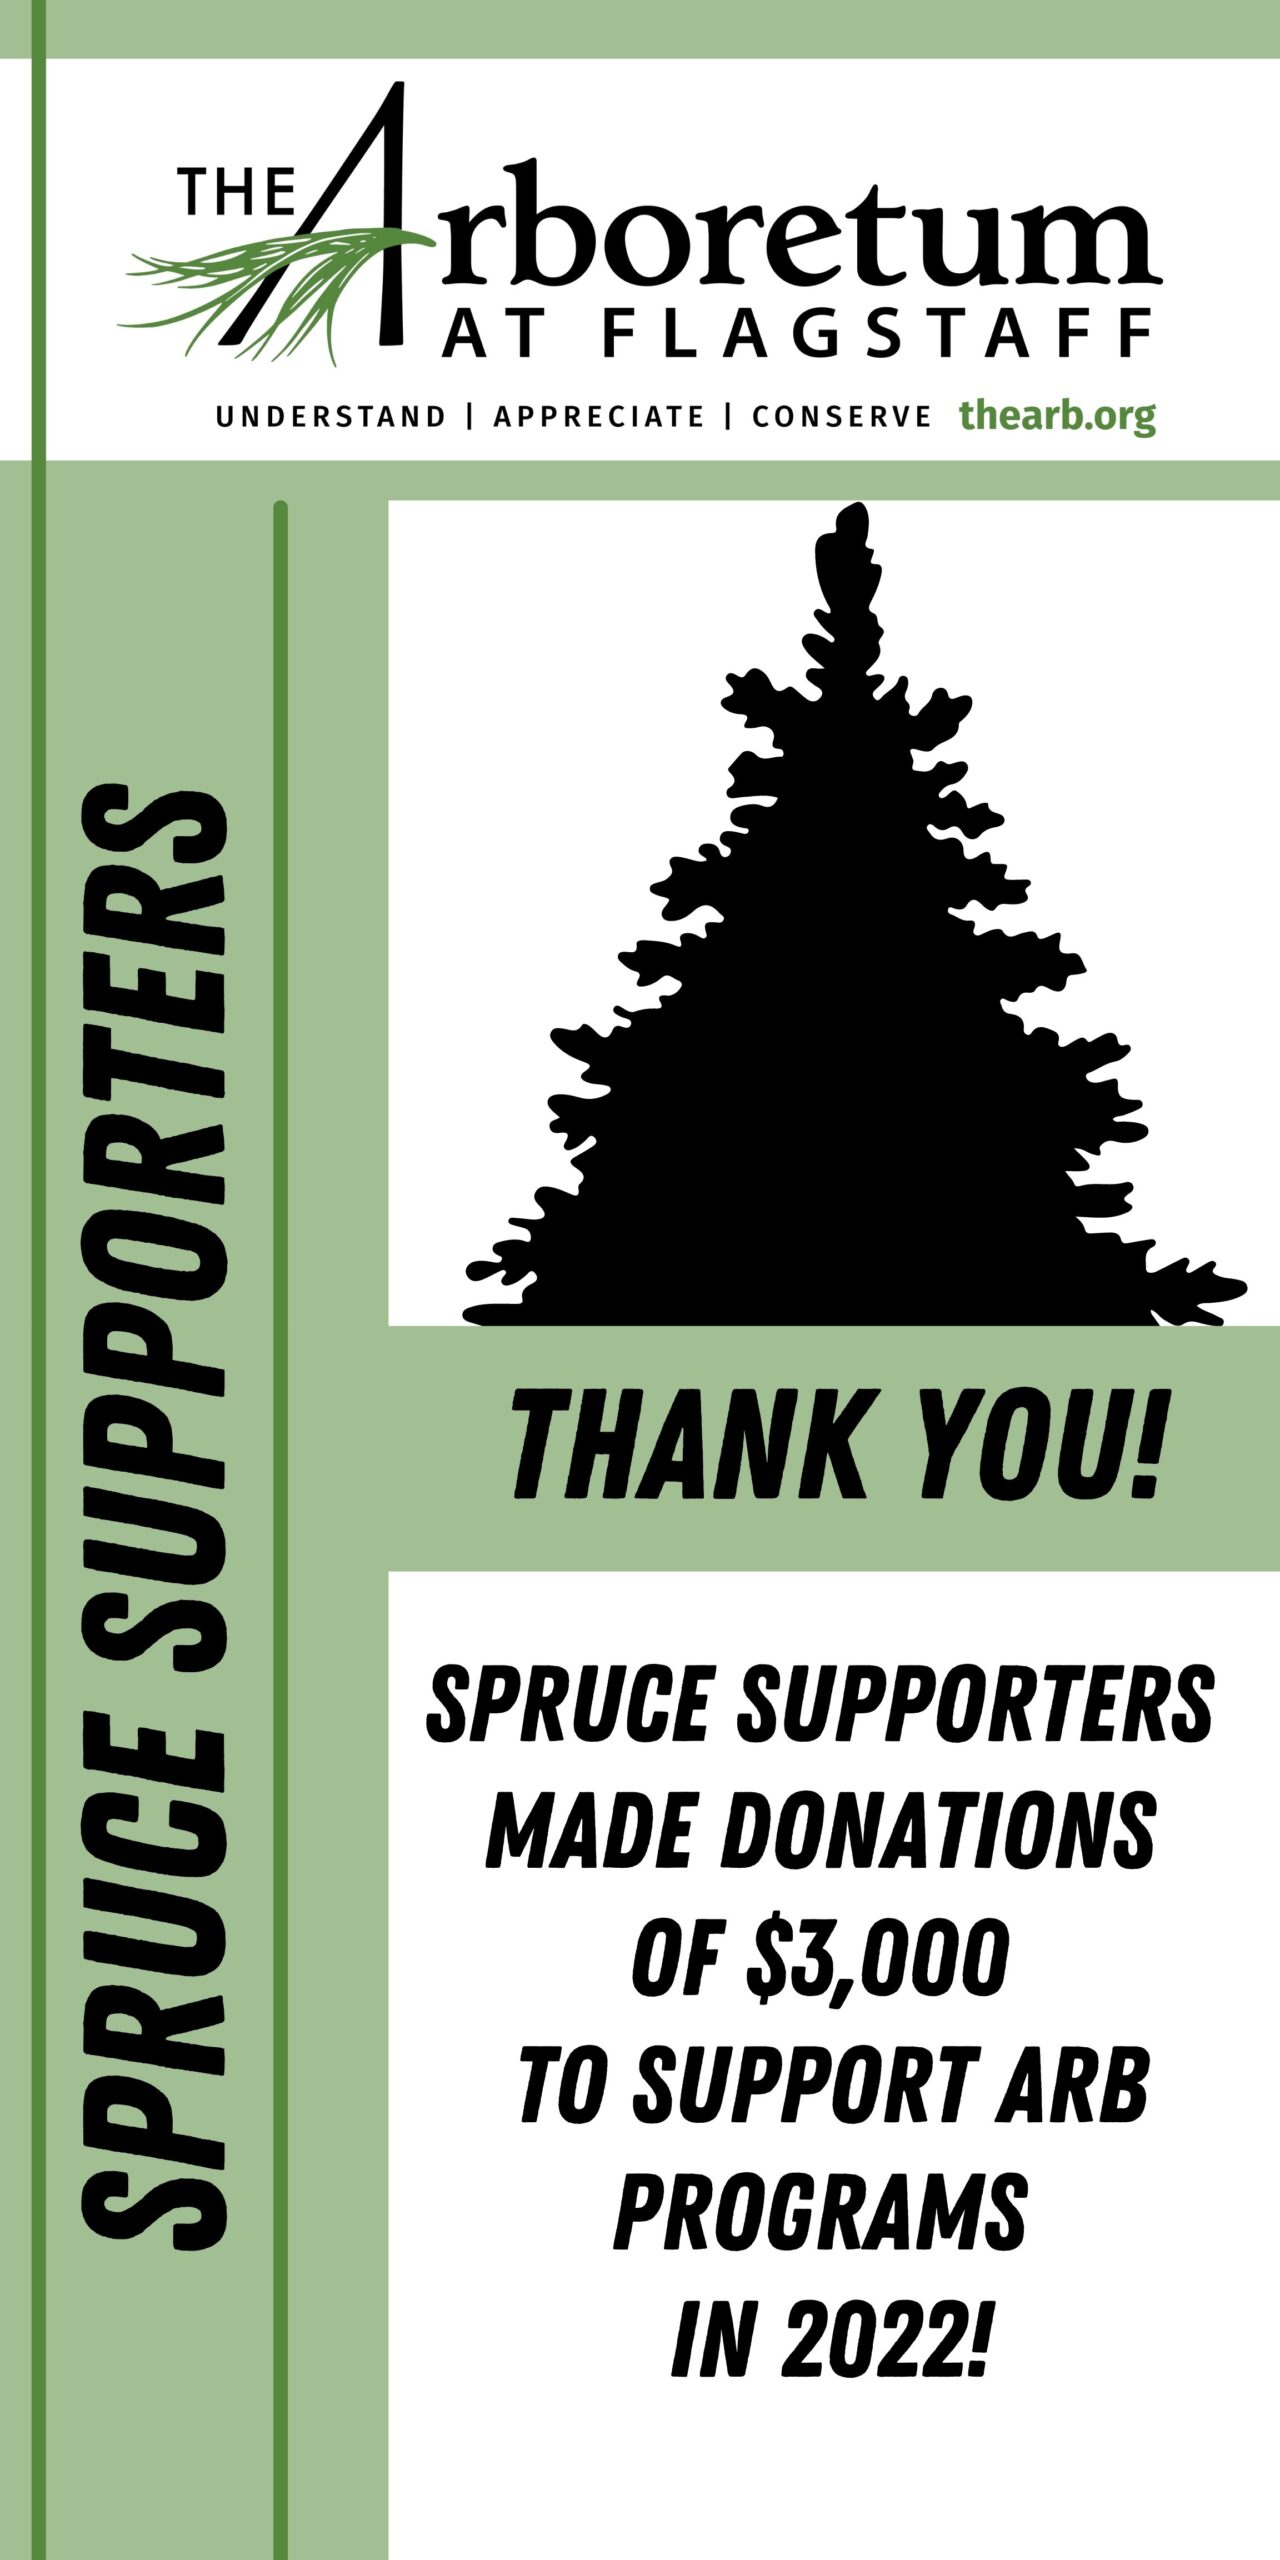 spruce supporters  made donations  of $3,000  to support Arb programs  in 2022!